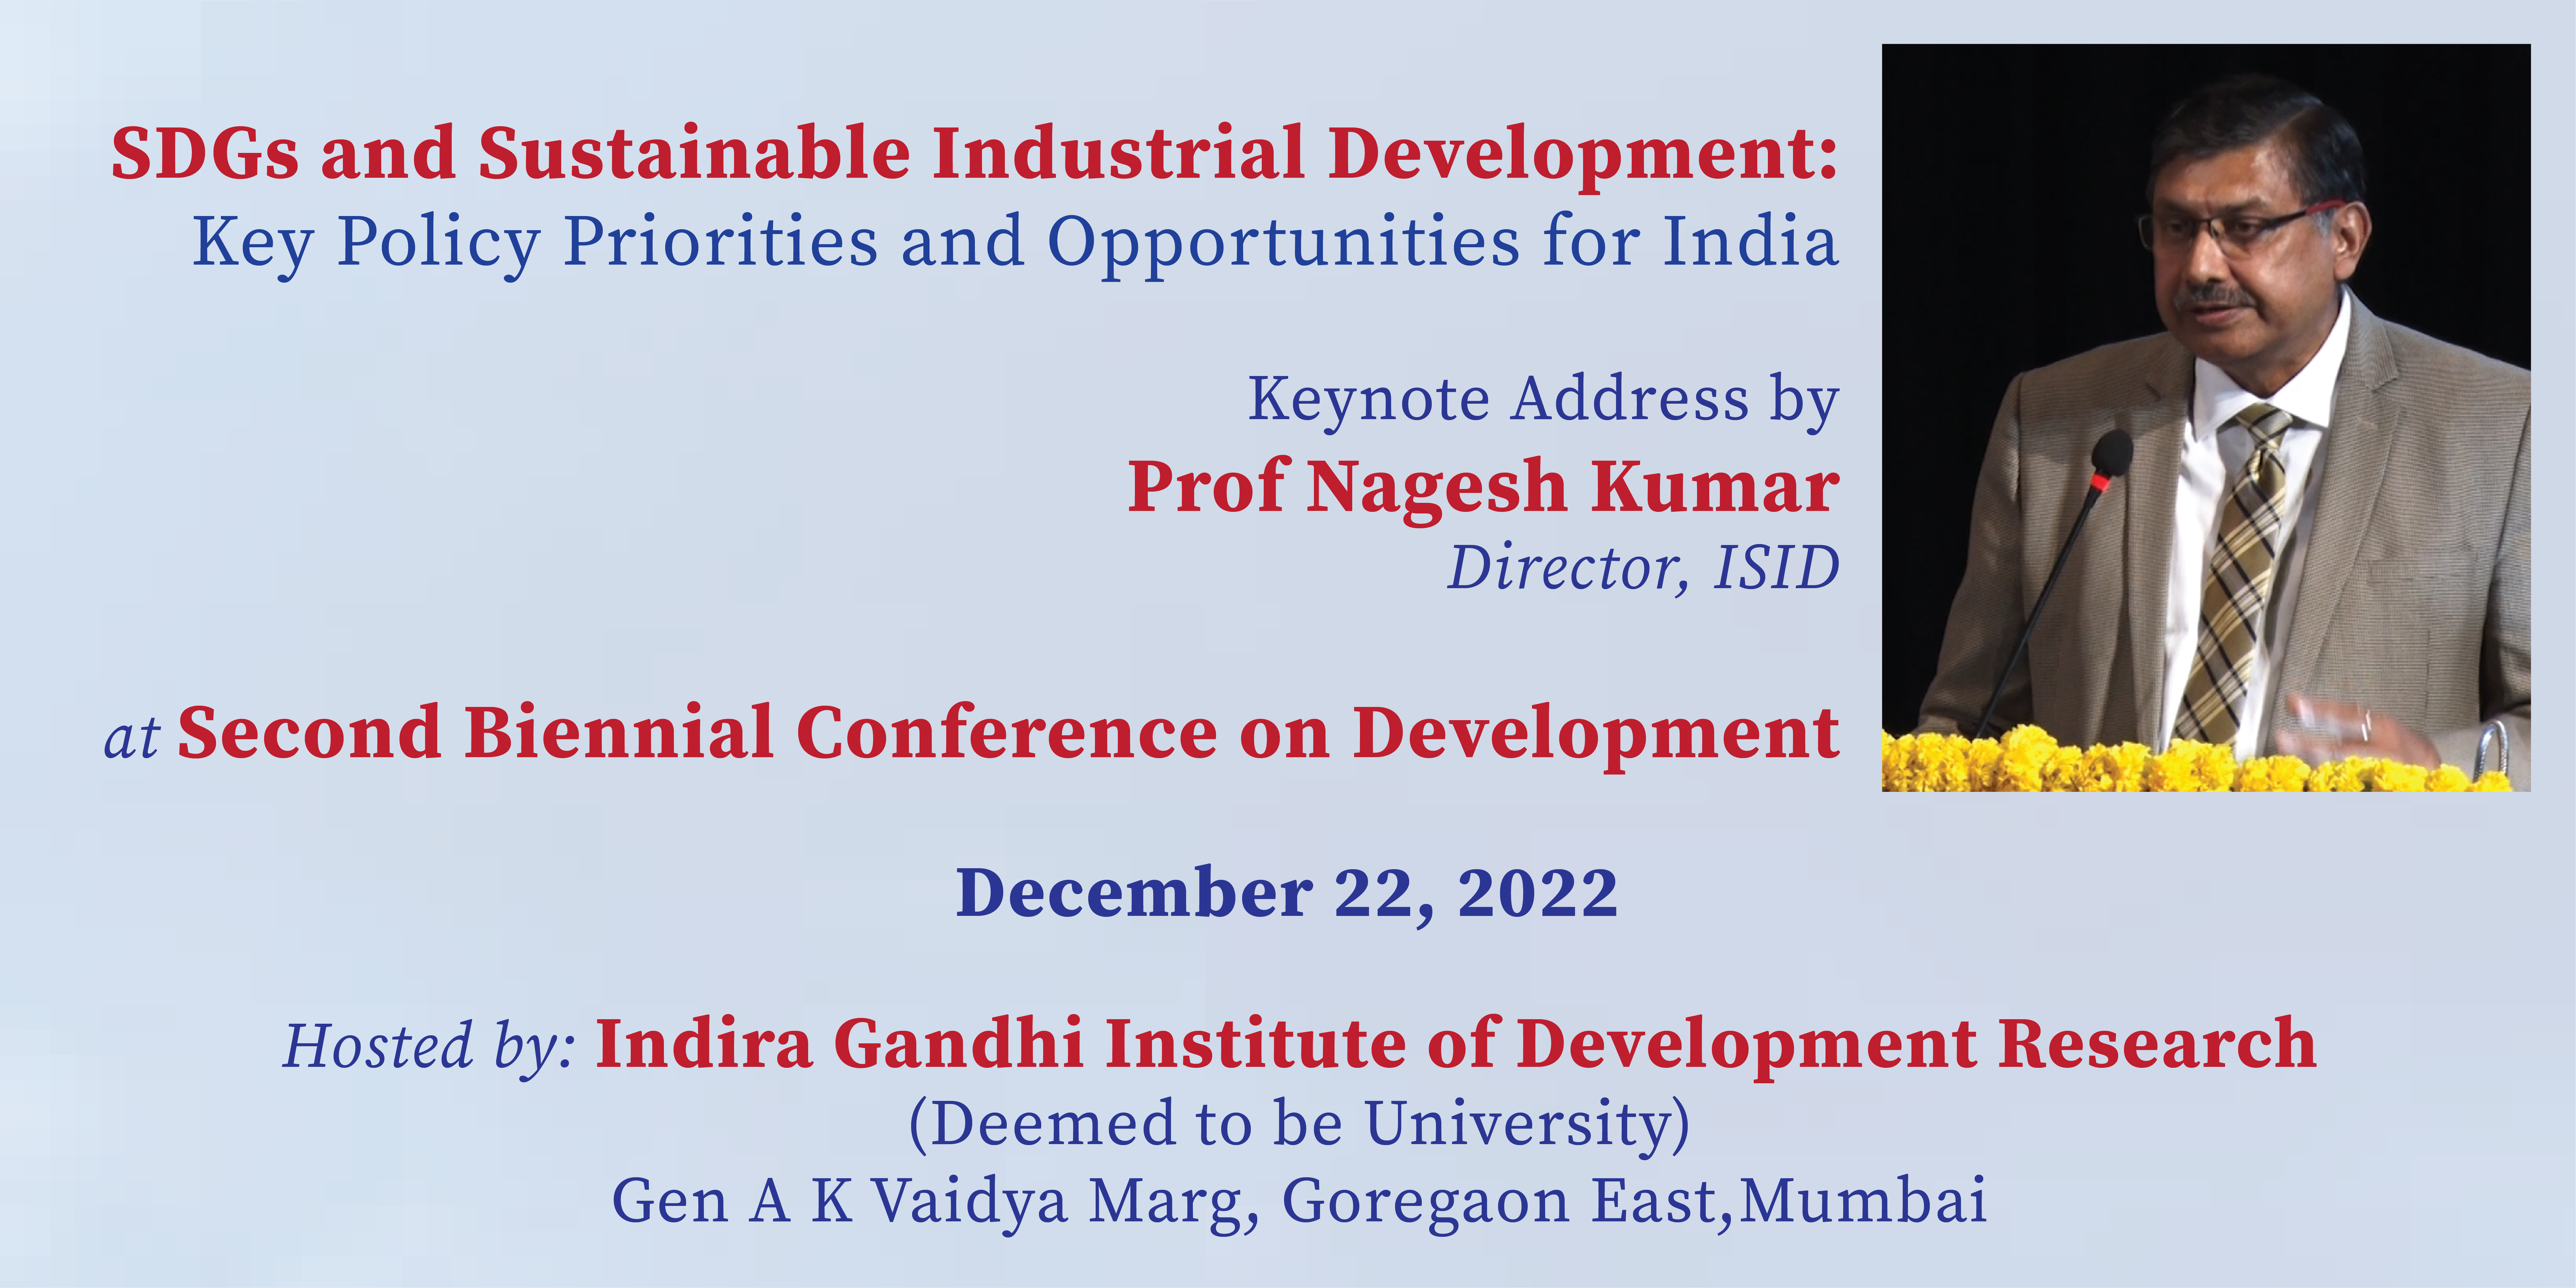 SDGs and Sustainable Industrial Development: Key Policy Priorities and Opportunities for India Keynote Address by Prof Nagesh Kumar